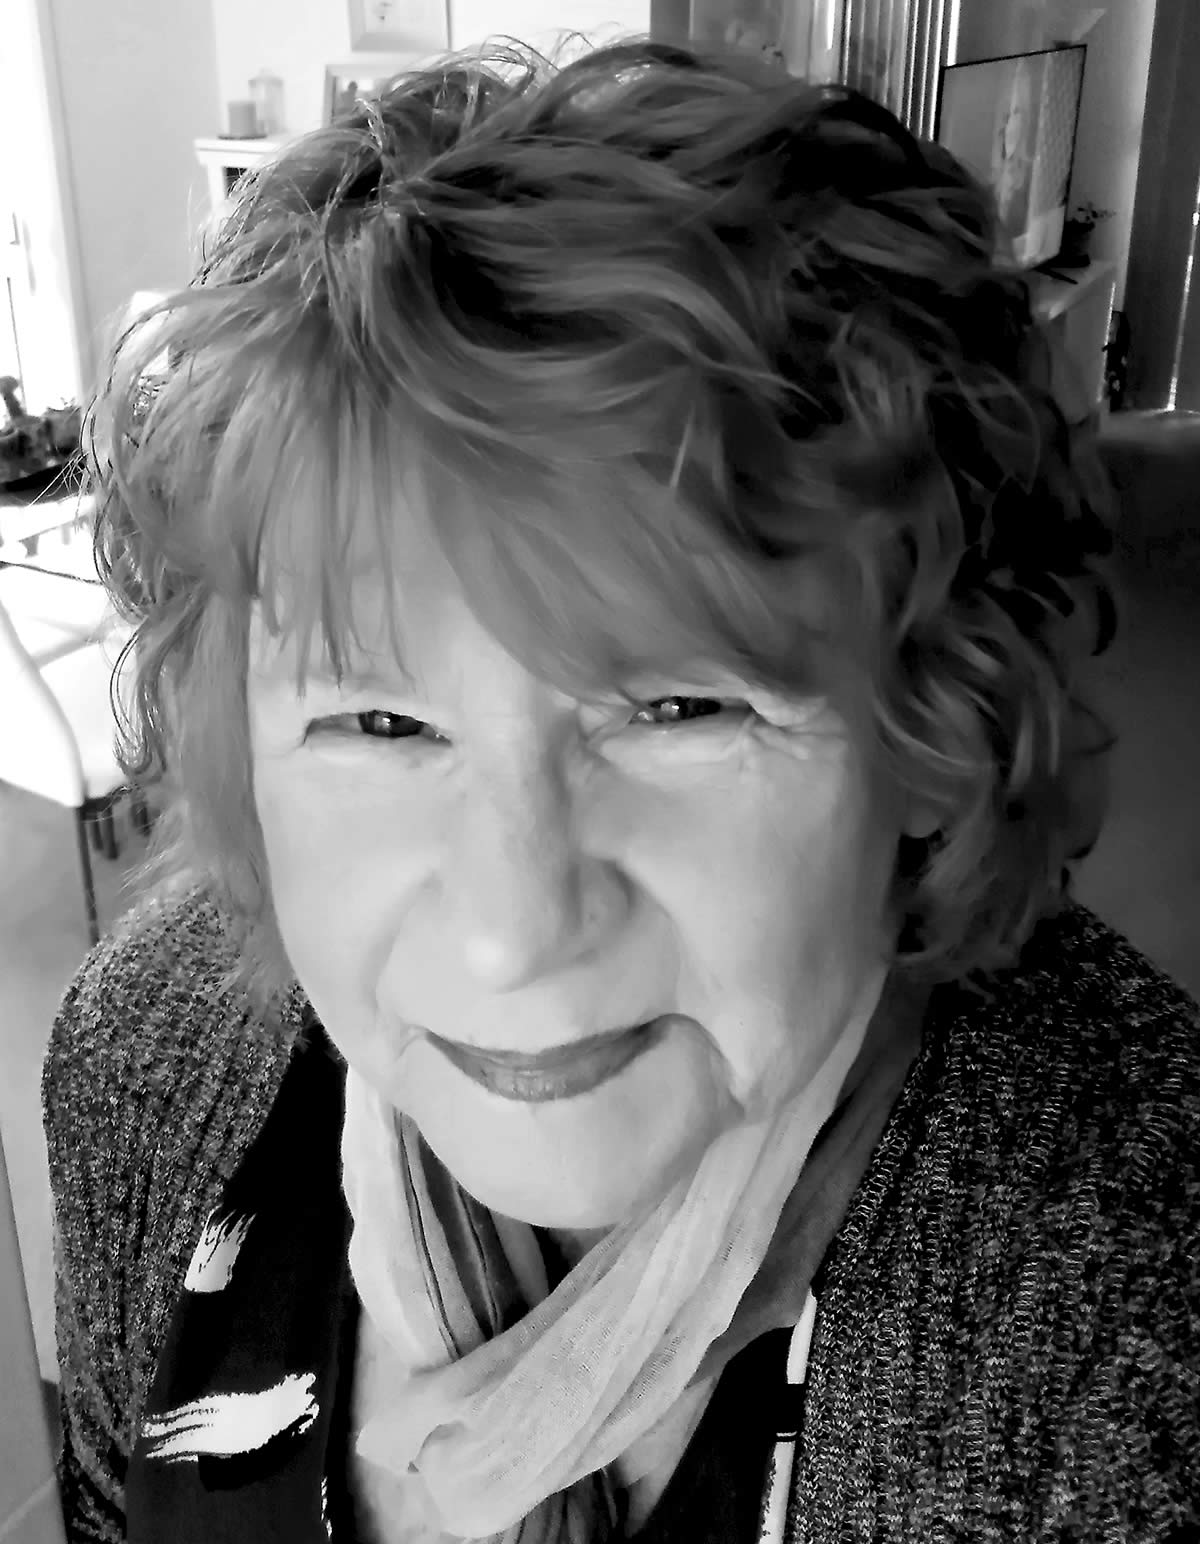 Black and white portrait photo of author Fran Spears.